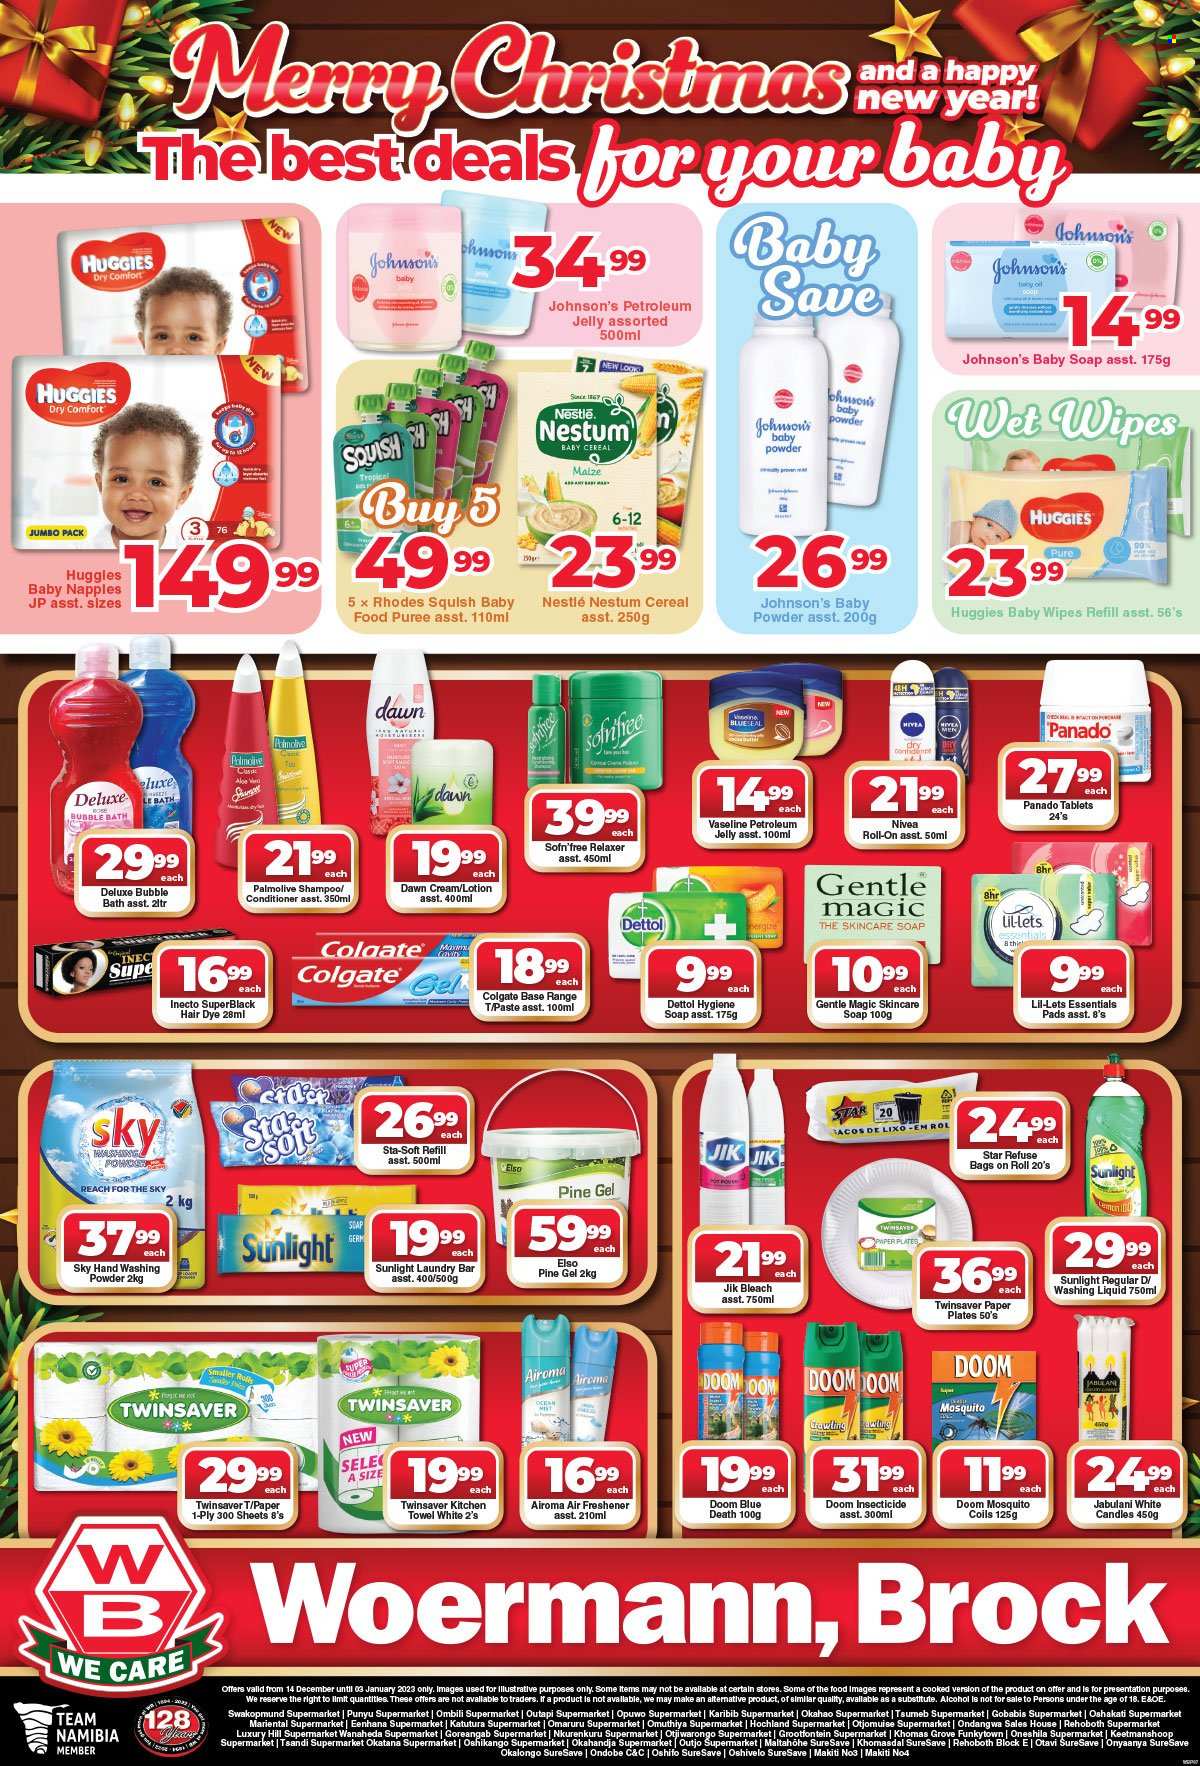 thumbnail - Woermann Brock catalogue  - 14/12/2022 - 03/01/2023 - Sales products - Nestlé, cereals, alcohol, wipes, Huggies, baby wipes, Johnson's, kitchen towels, Dettol, bleach, laundry powder, laundry soap bar, Sunlight, bubble bath, shampoo, Nivea, Palmolive, Vaseline, soap, Colgate, Lil-lets, petroleum jelly, Gentle Magic, conditioner, relaxer, body lotion, roll-on. Page 7.